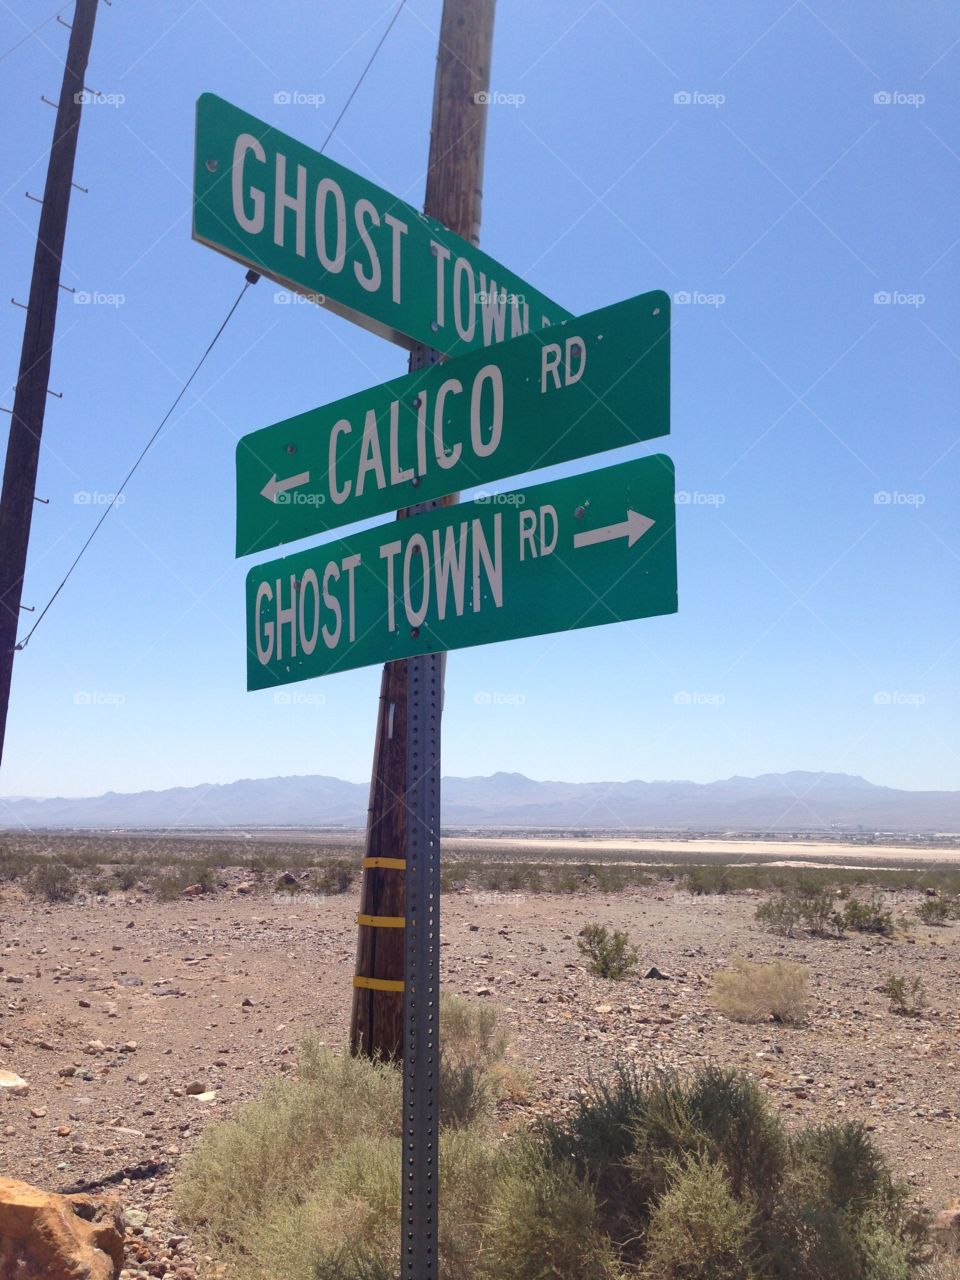 Calico ghost town sign. Calico ghost town sign on the road
